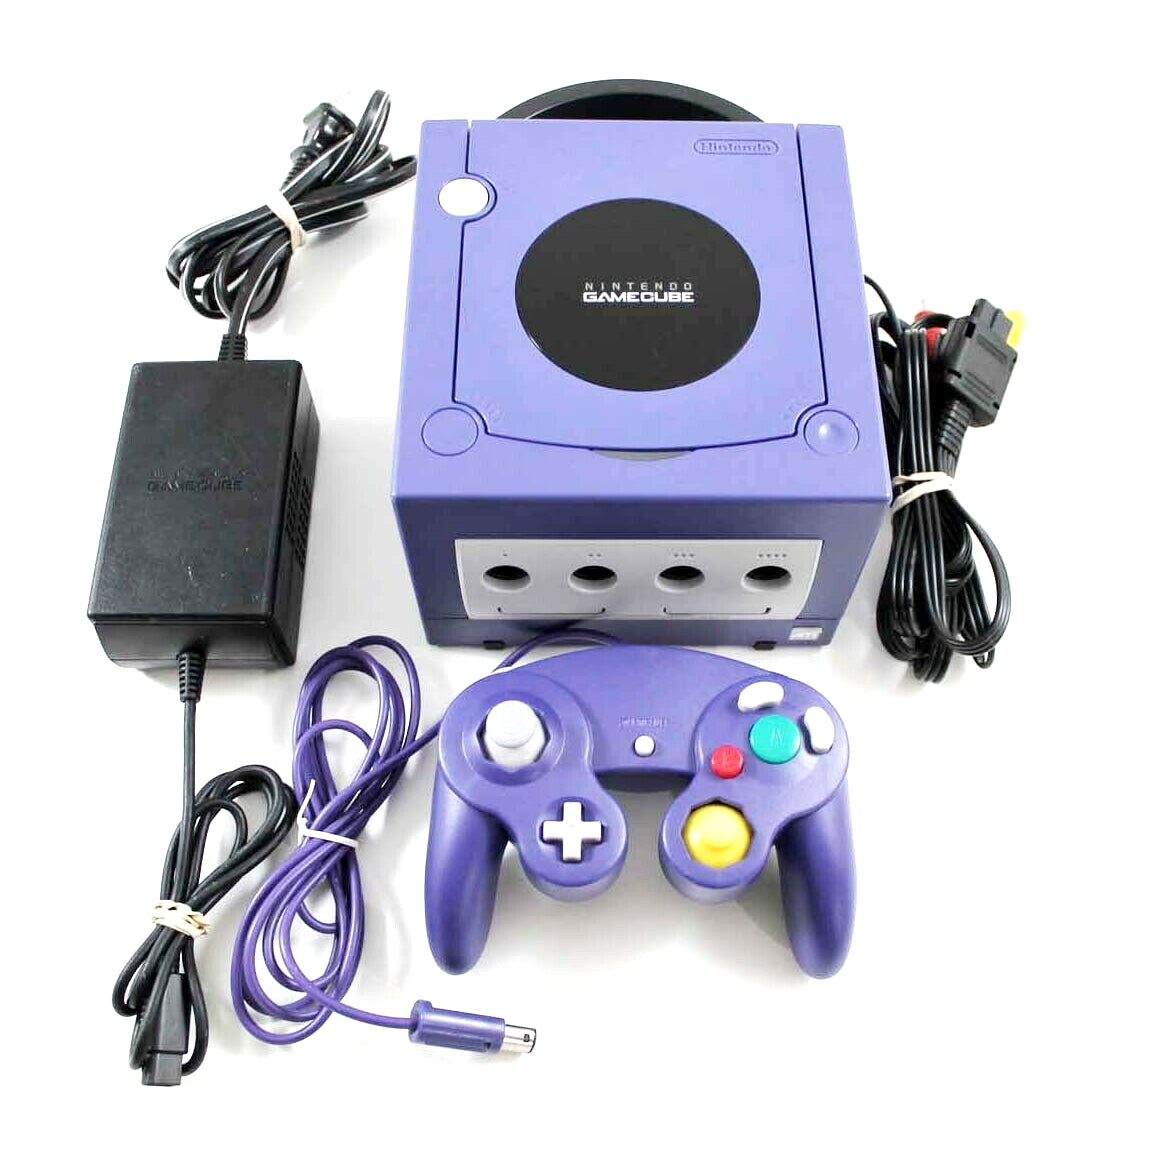 Nintendo GameCube Console System - Indigo - YourGamingShop.com - Buy, Sell, Trade Video Games Online. 120 Day Warranty. Satisfaction Guaranteed.